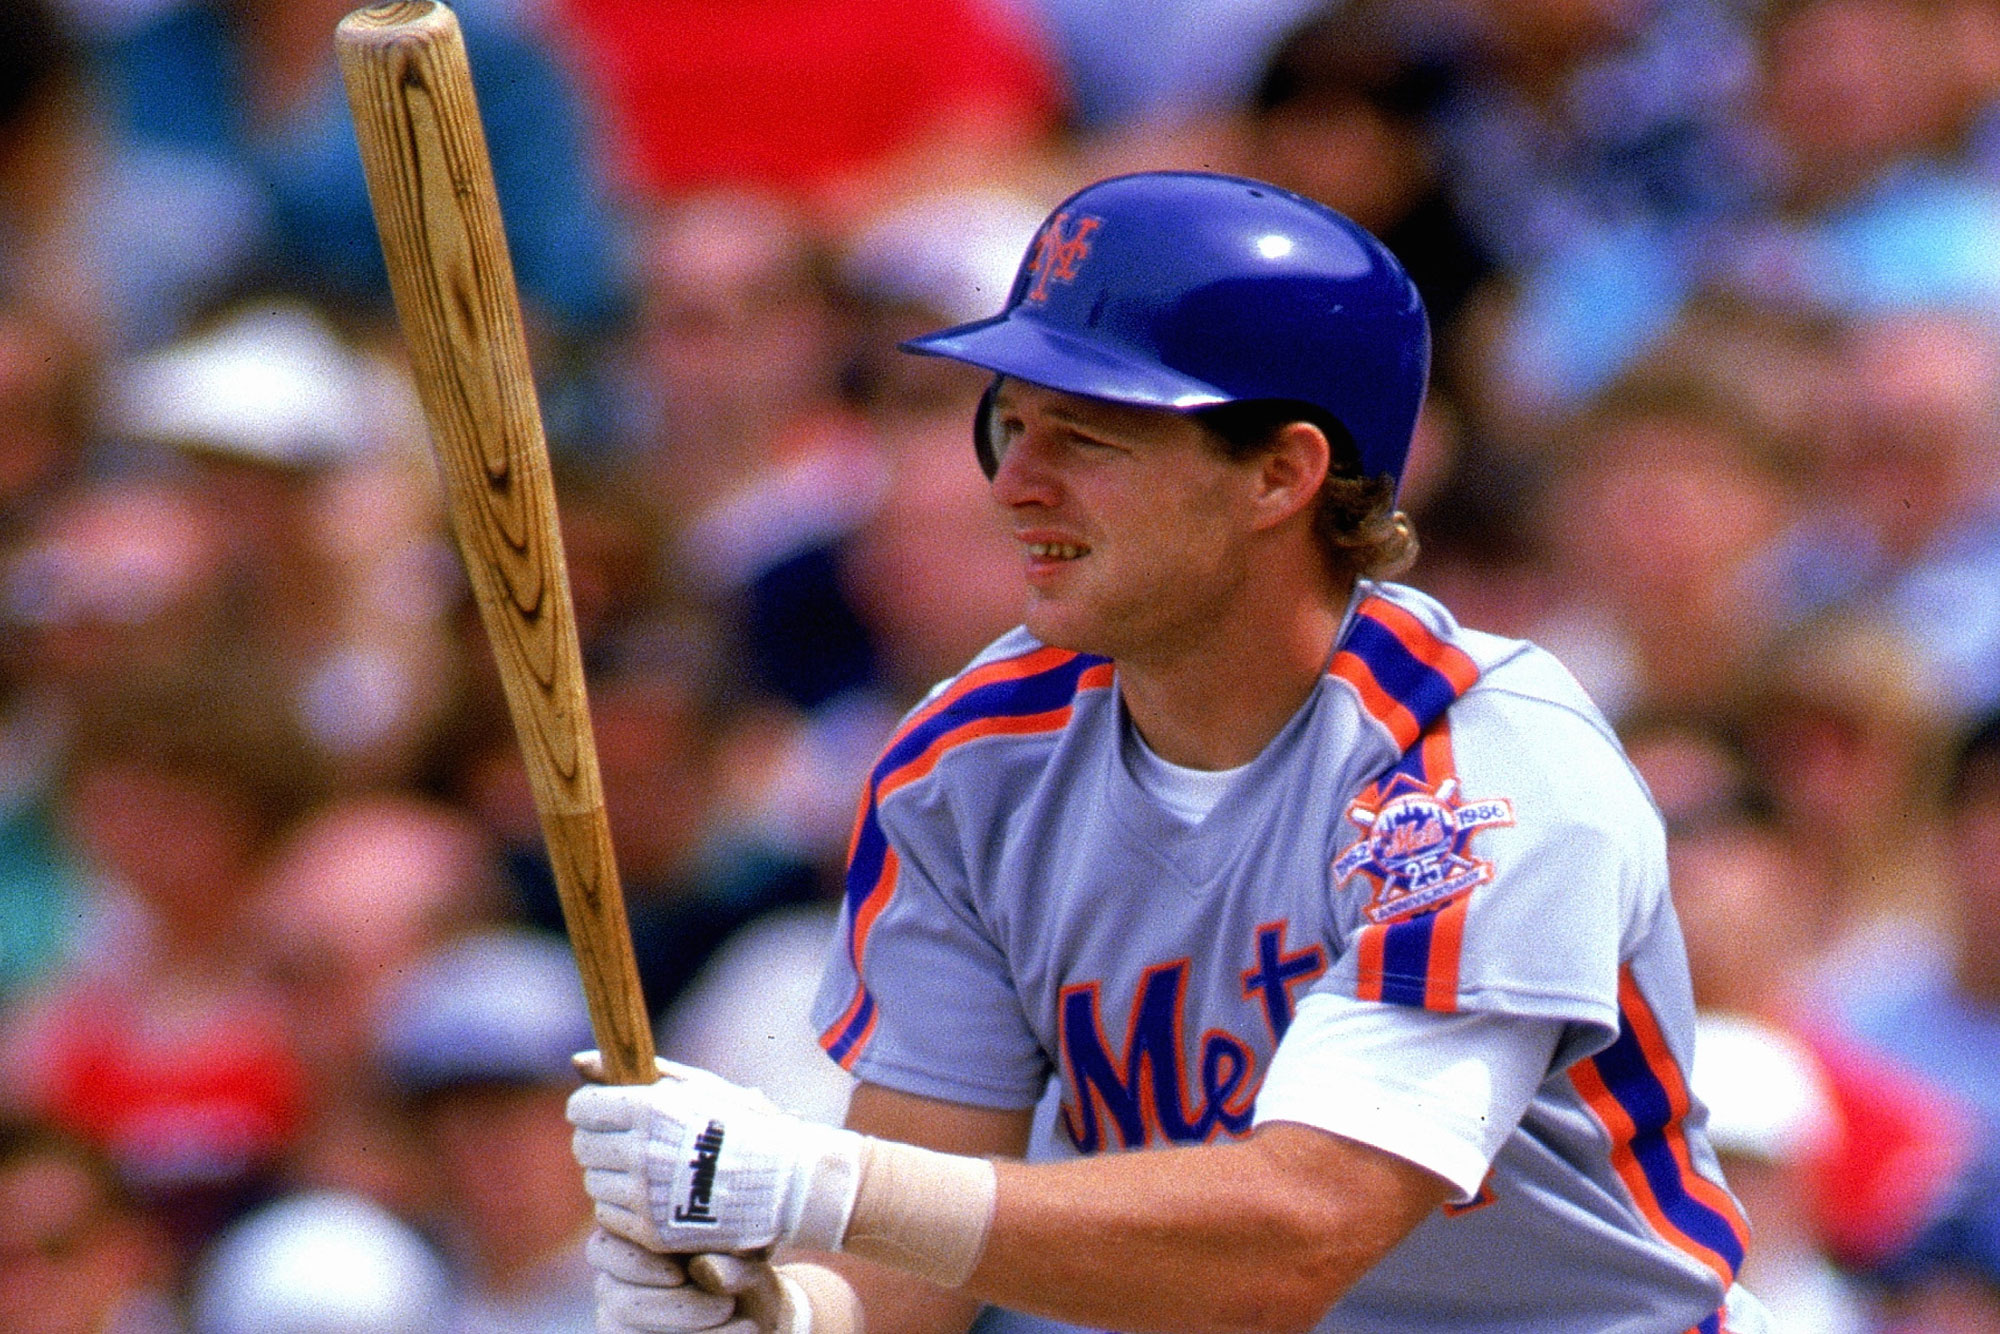 ExMet Lenny Dykstra reveals he hired PIs to get dirt on umpires